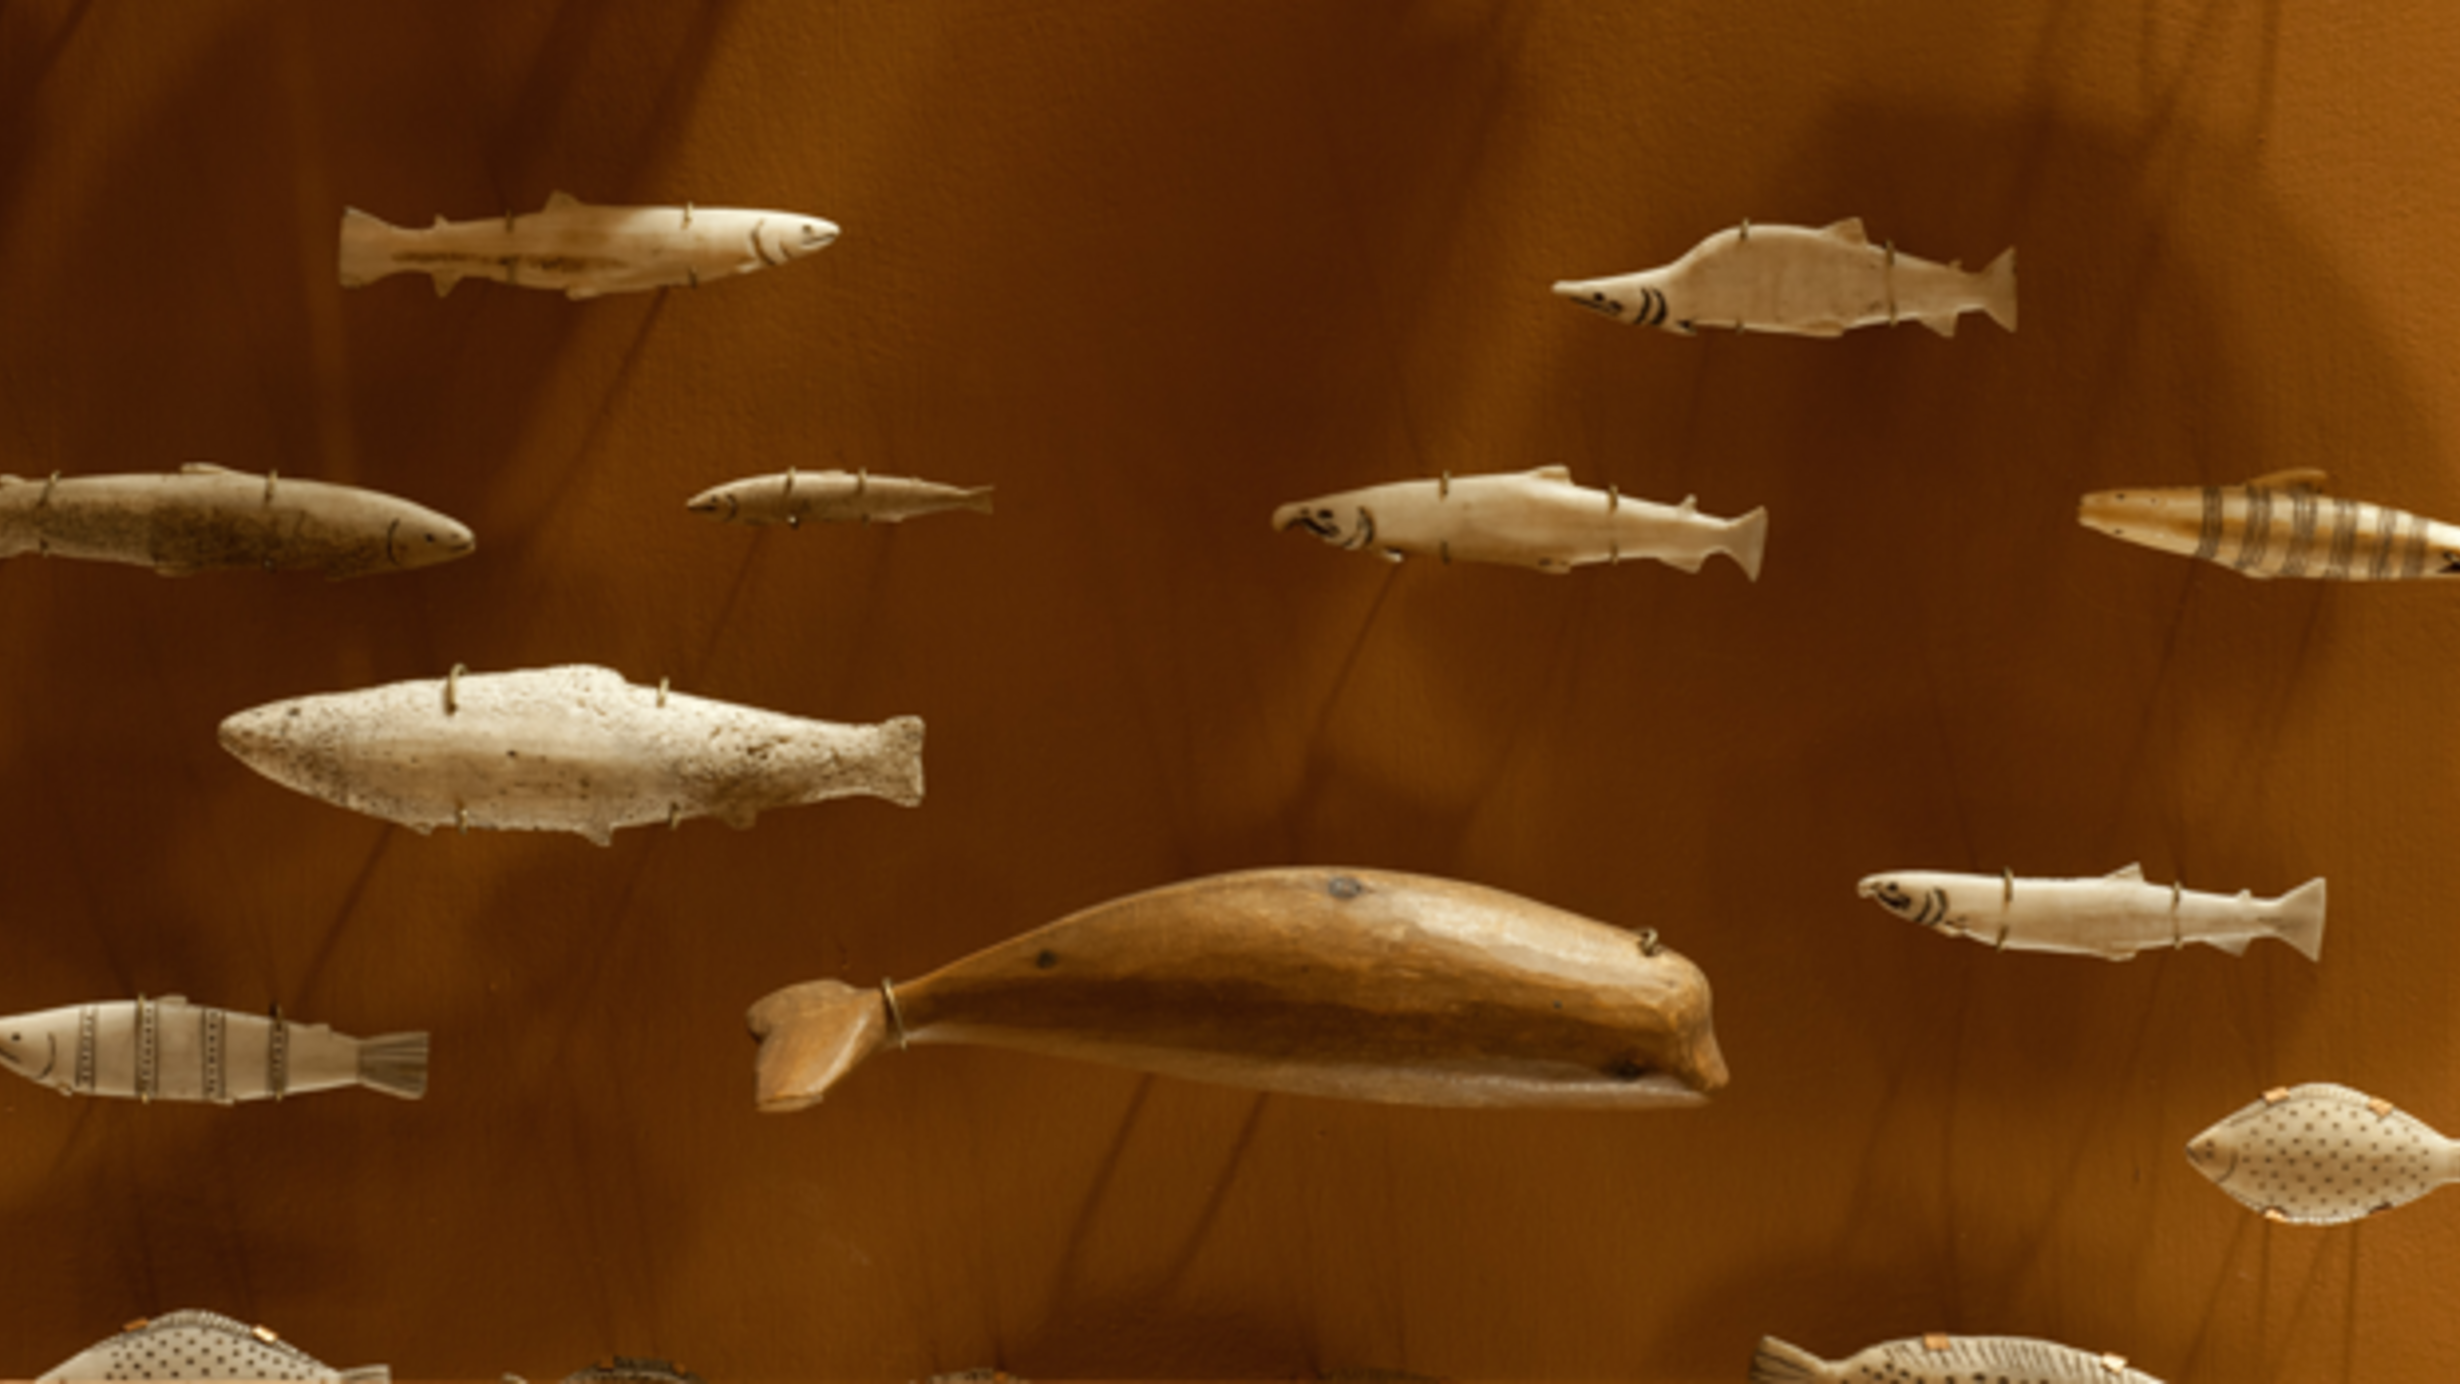 A small whale carved of wood with several other carved figurines of assorted fish.